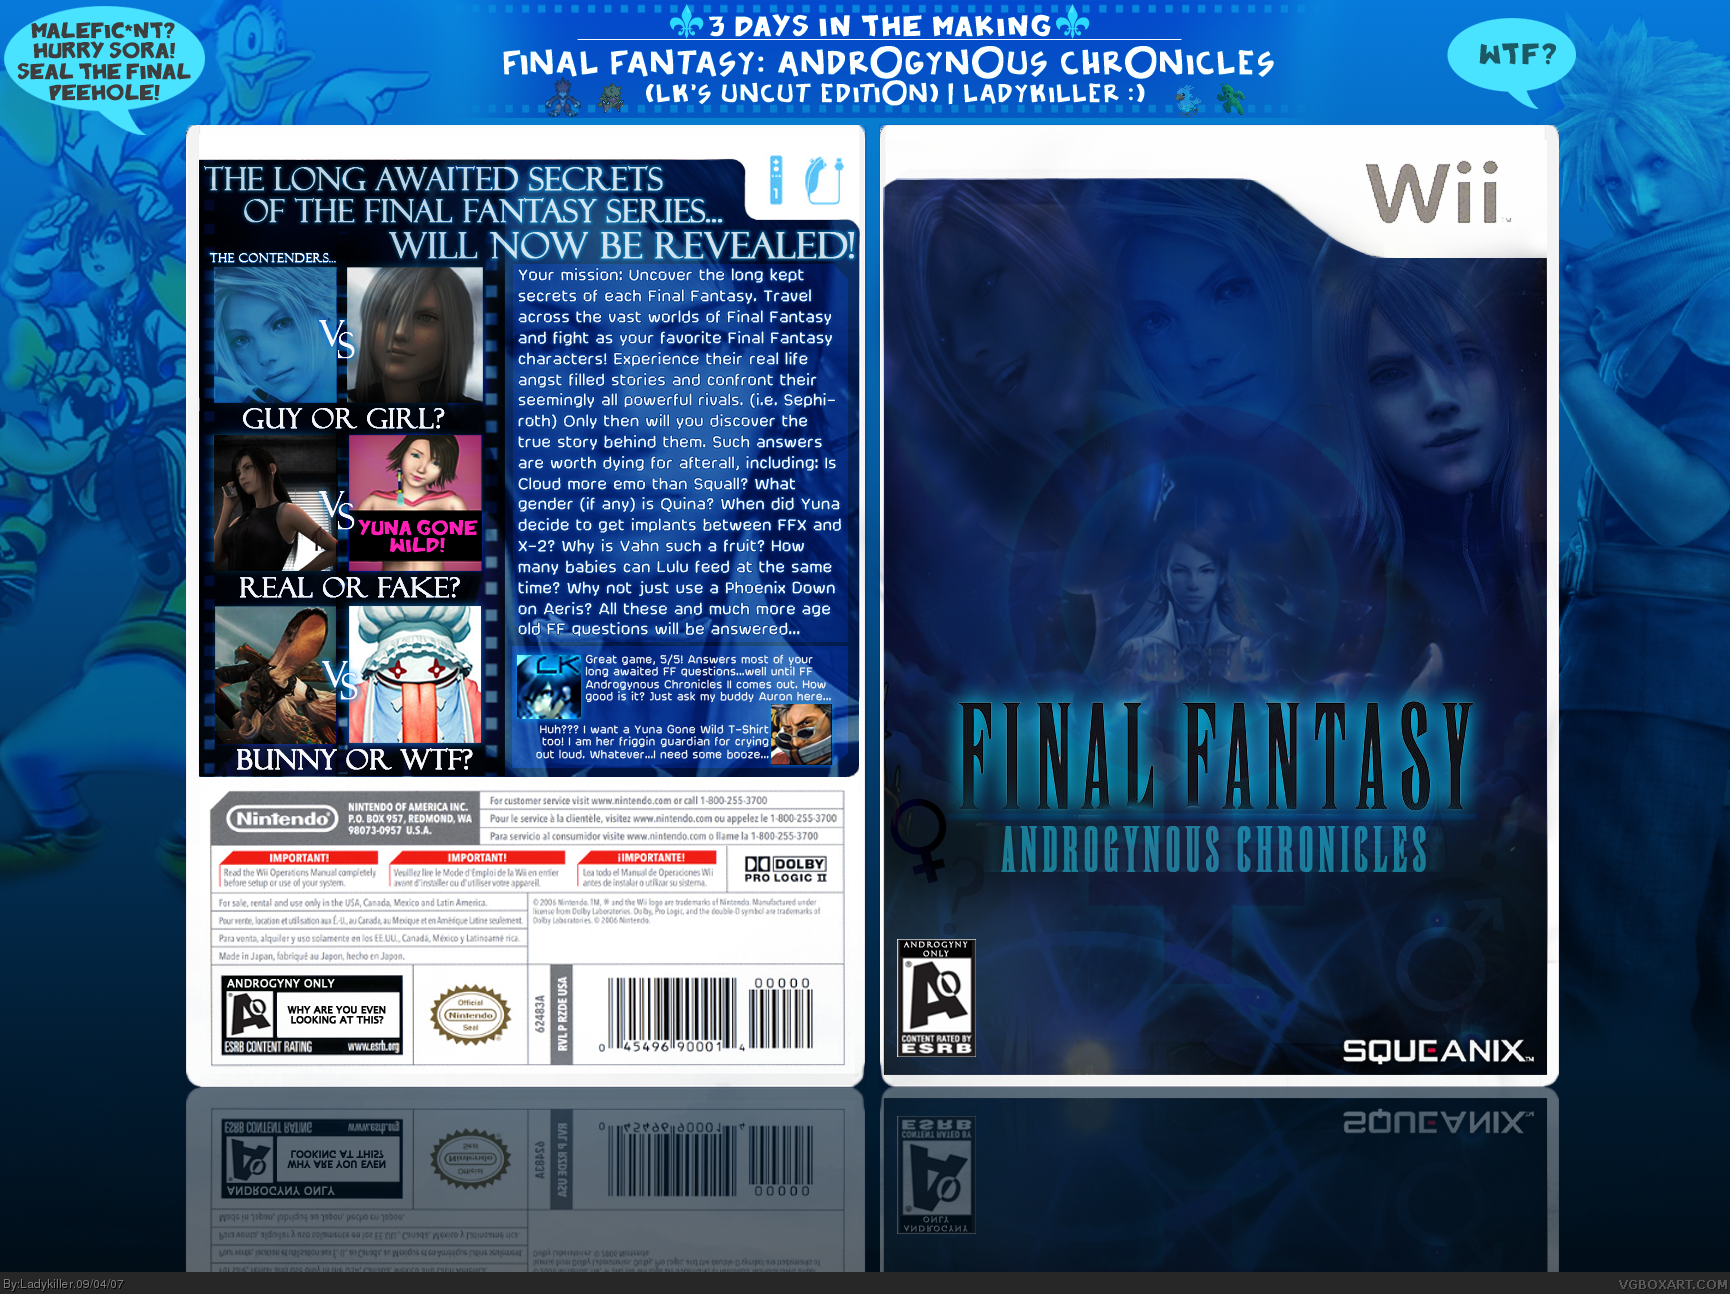 Final Fantasy: Androgynous Chronicles box cover